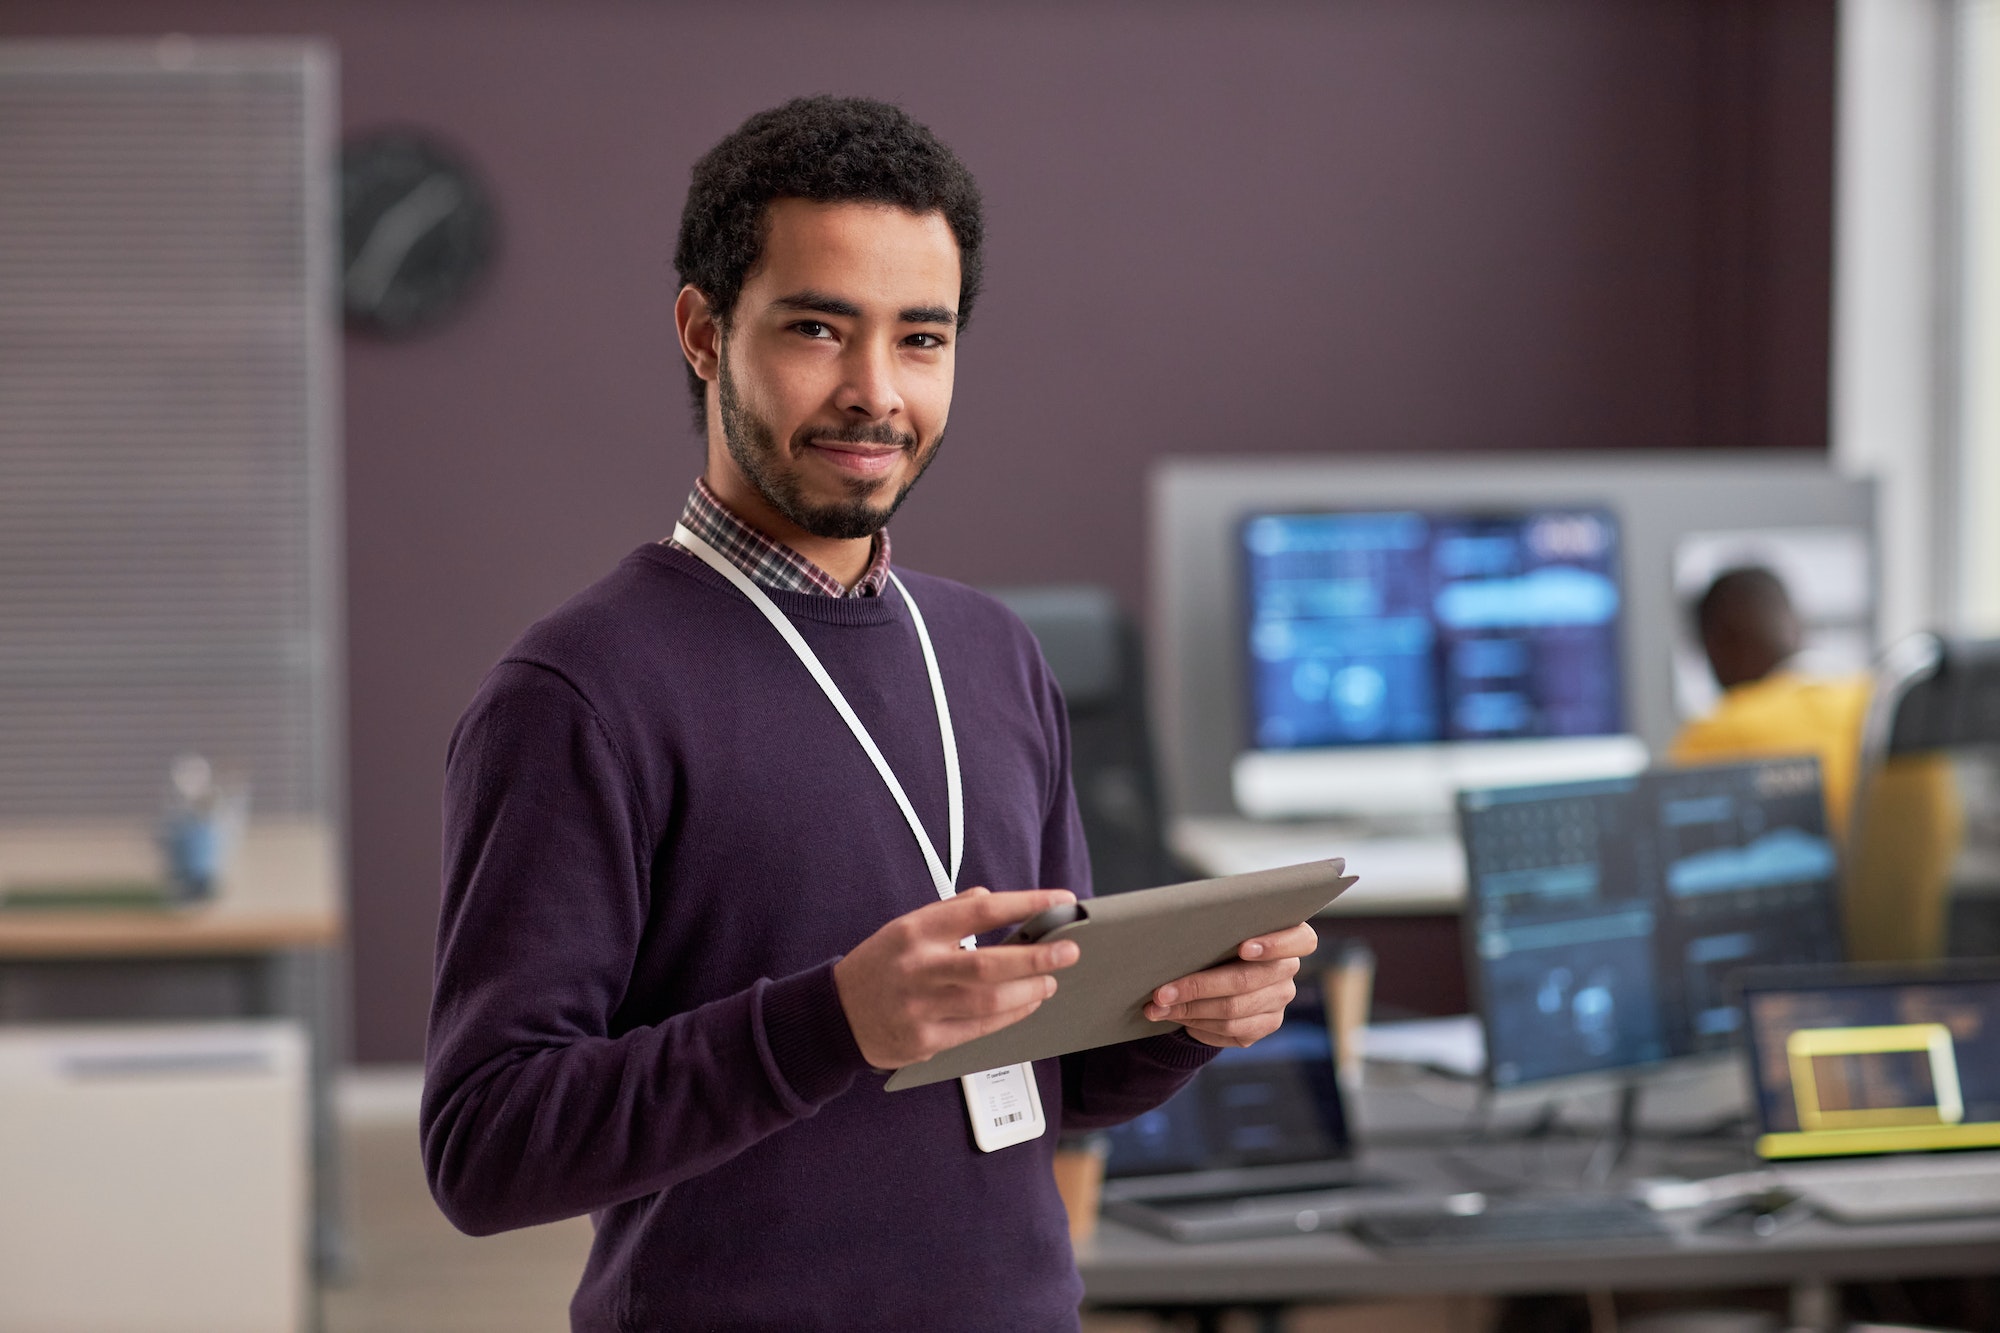 Smiling software engineer holding digital tablet while standing in tech office